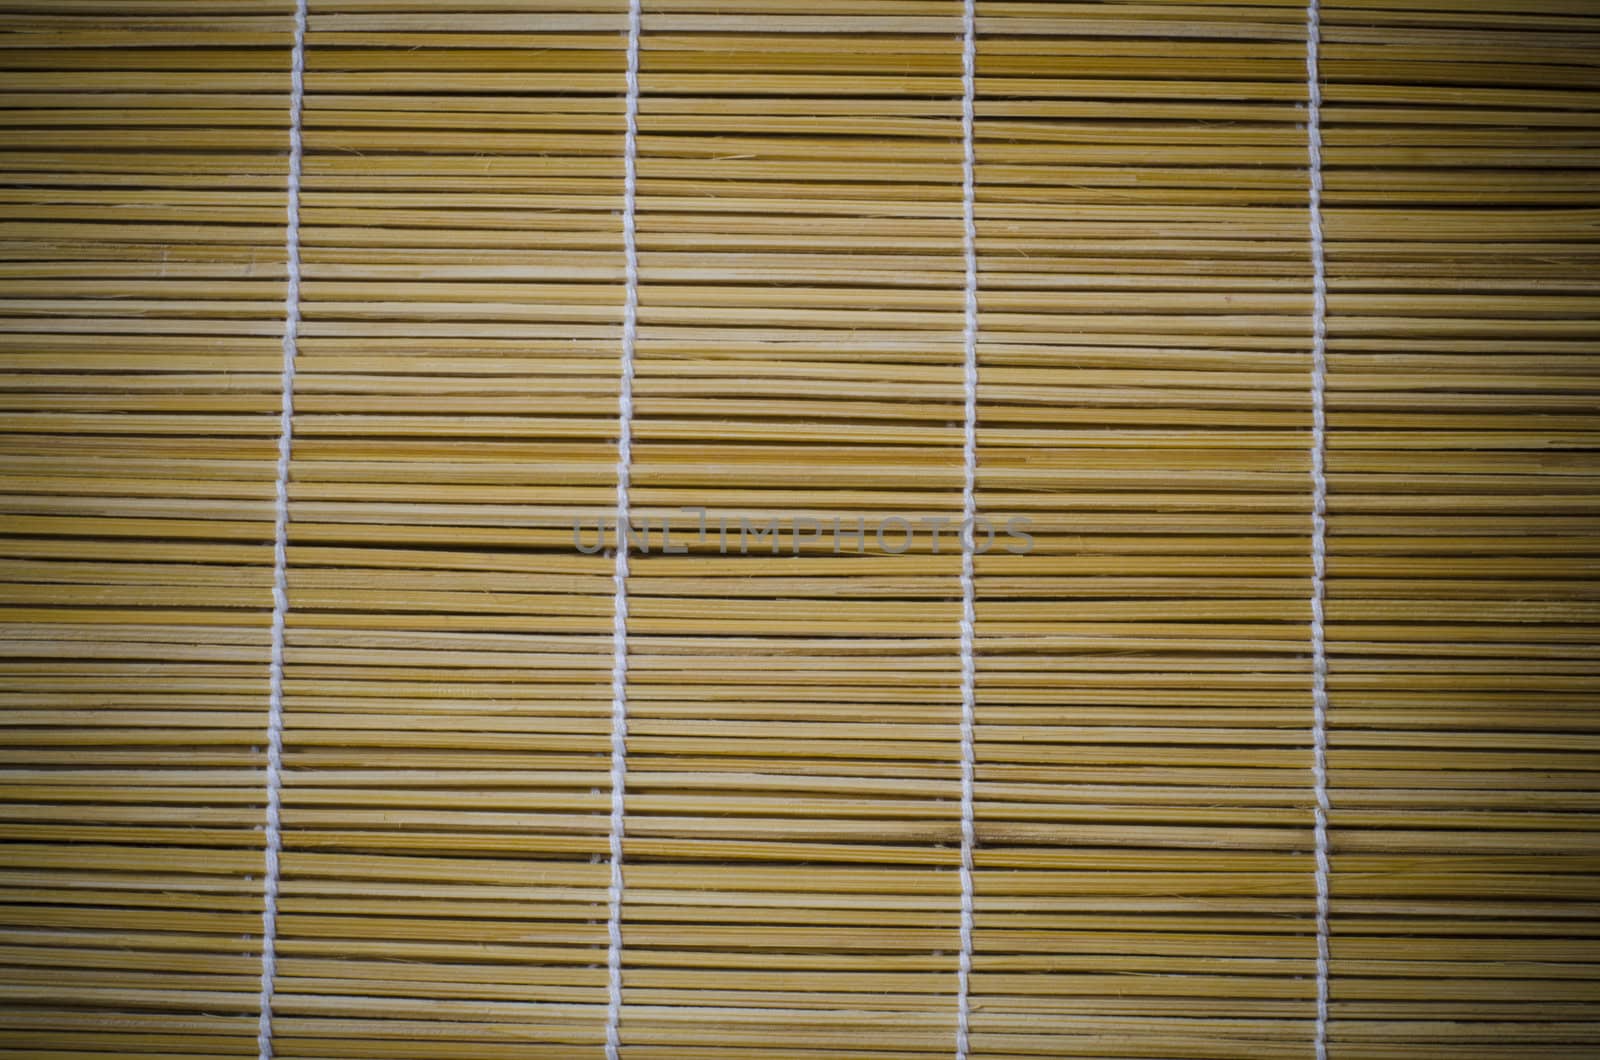 aged straws tied together with white thread textured background